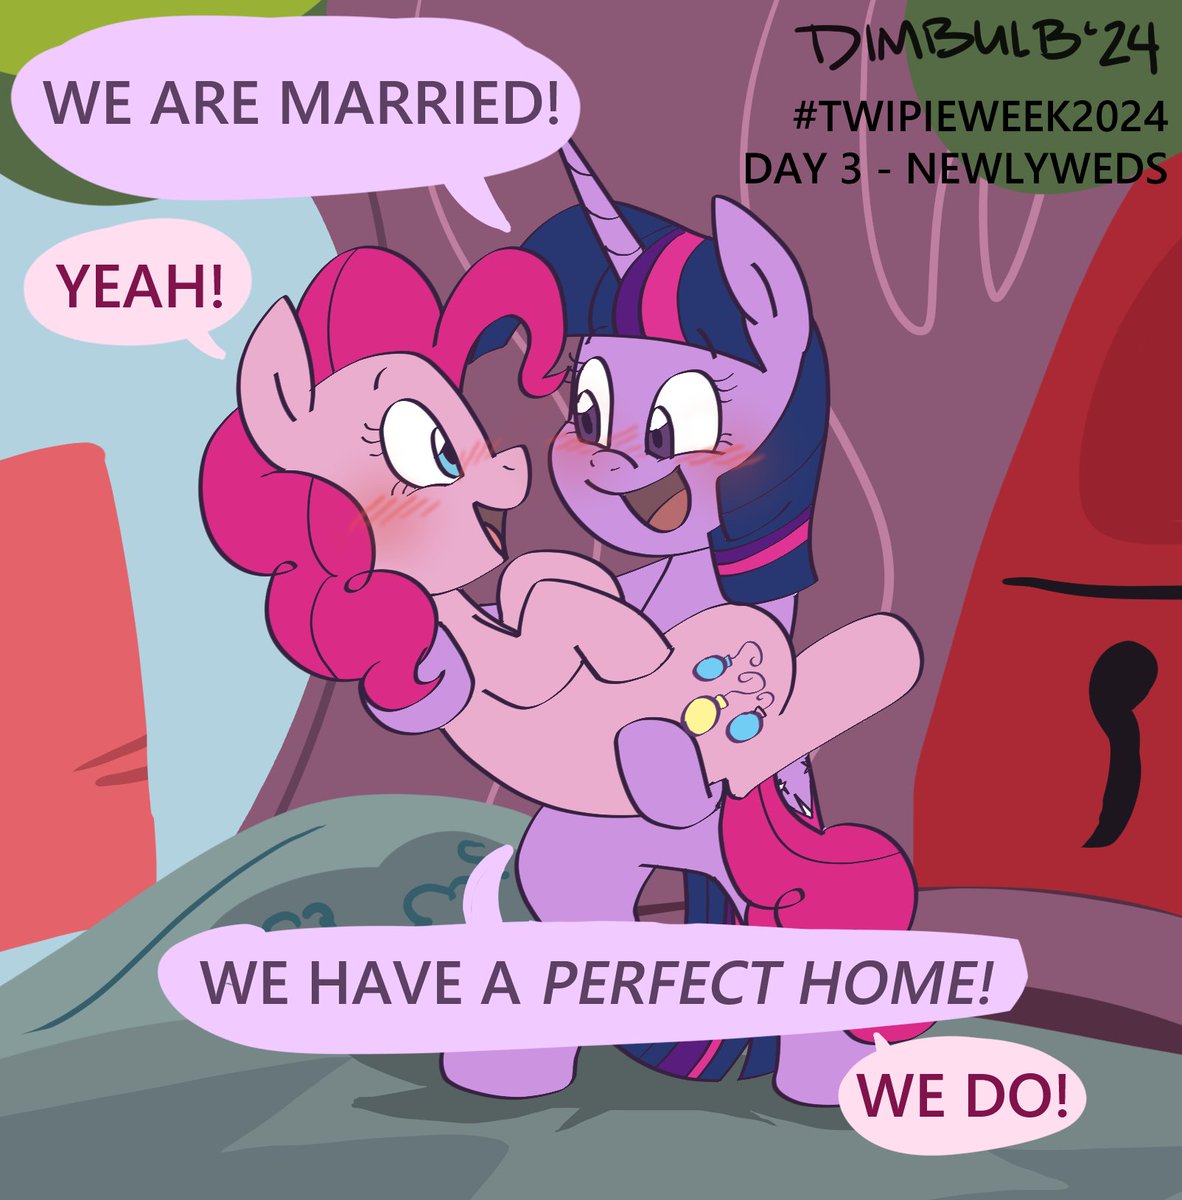 For Day 3 of TwiPie Week on tumblr, prompt is 'Newlyweds'! 

I really like the fic, 'A Beautiful Night', by MrNumbers. This was based on one of my fave moments in it.

#mlp #mylittlepony #twipie #twilightsparkle #pinkiepie